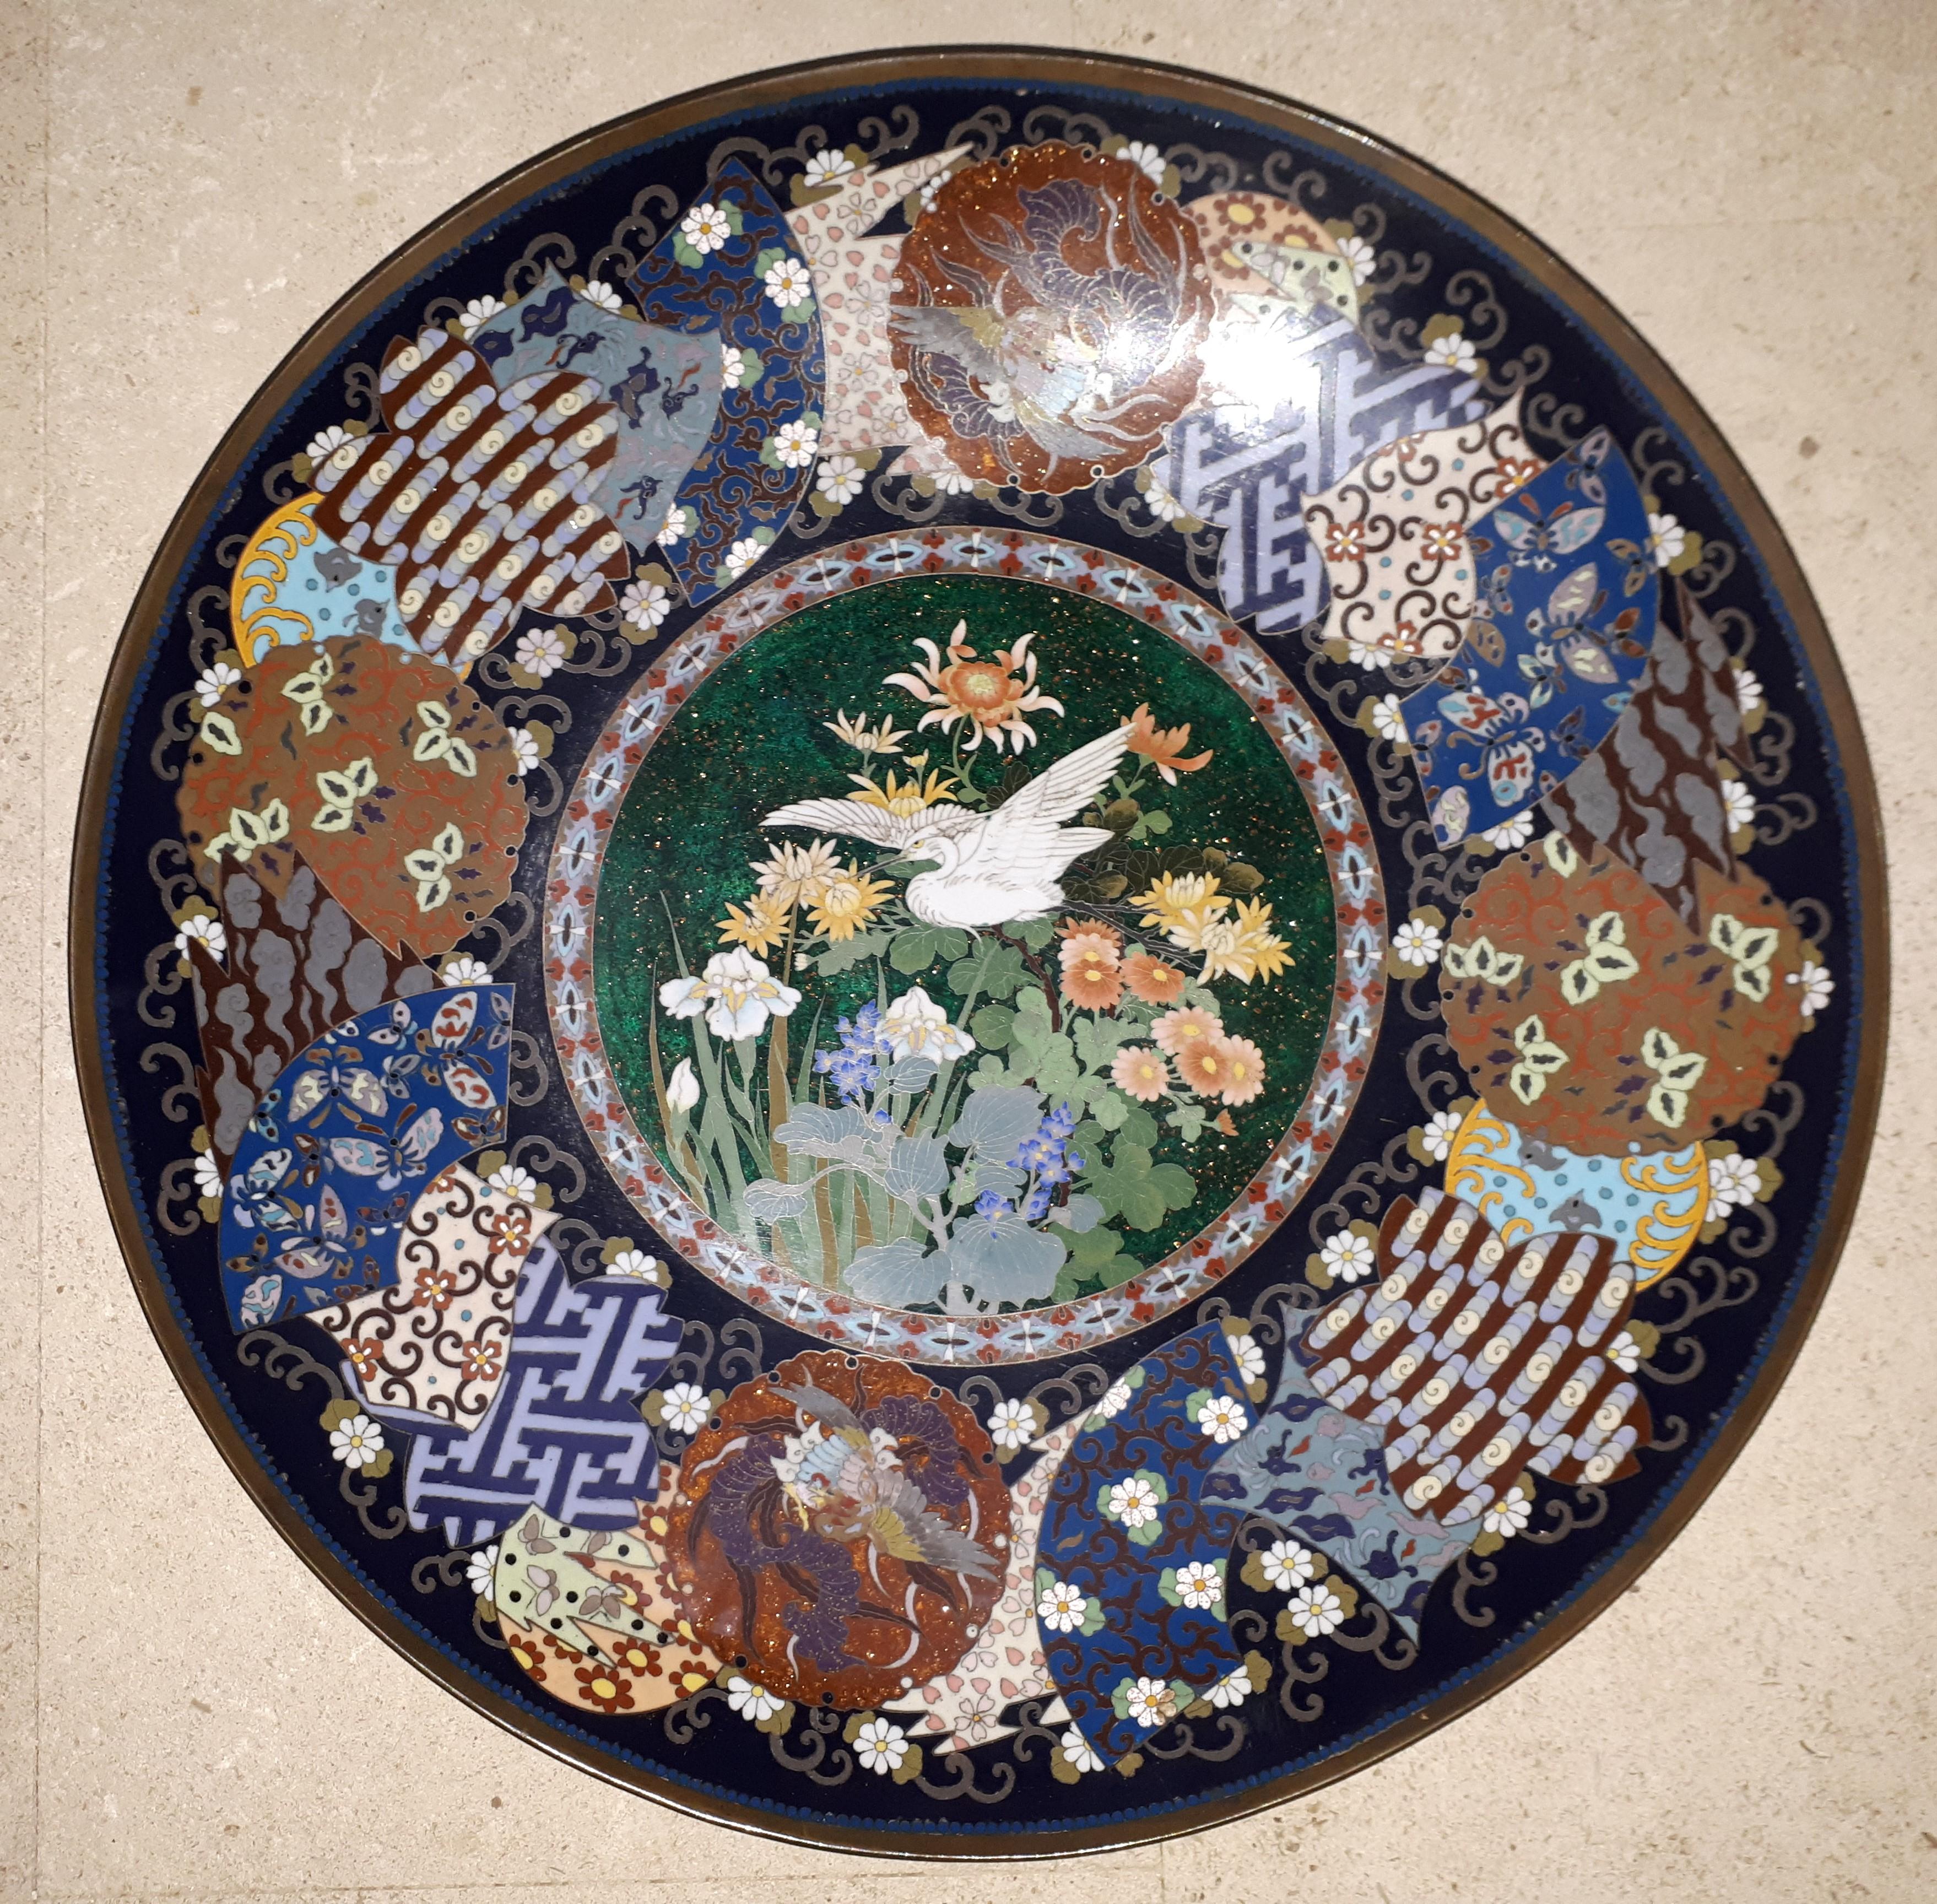 Bronze and cloisonné enamel dish very finely decorated with an egret in flight above various flowers on a background of copper inclusions and gold powder.
The wing decorated in particular with phoenixes and butterflies in flight on a background of